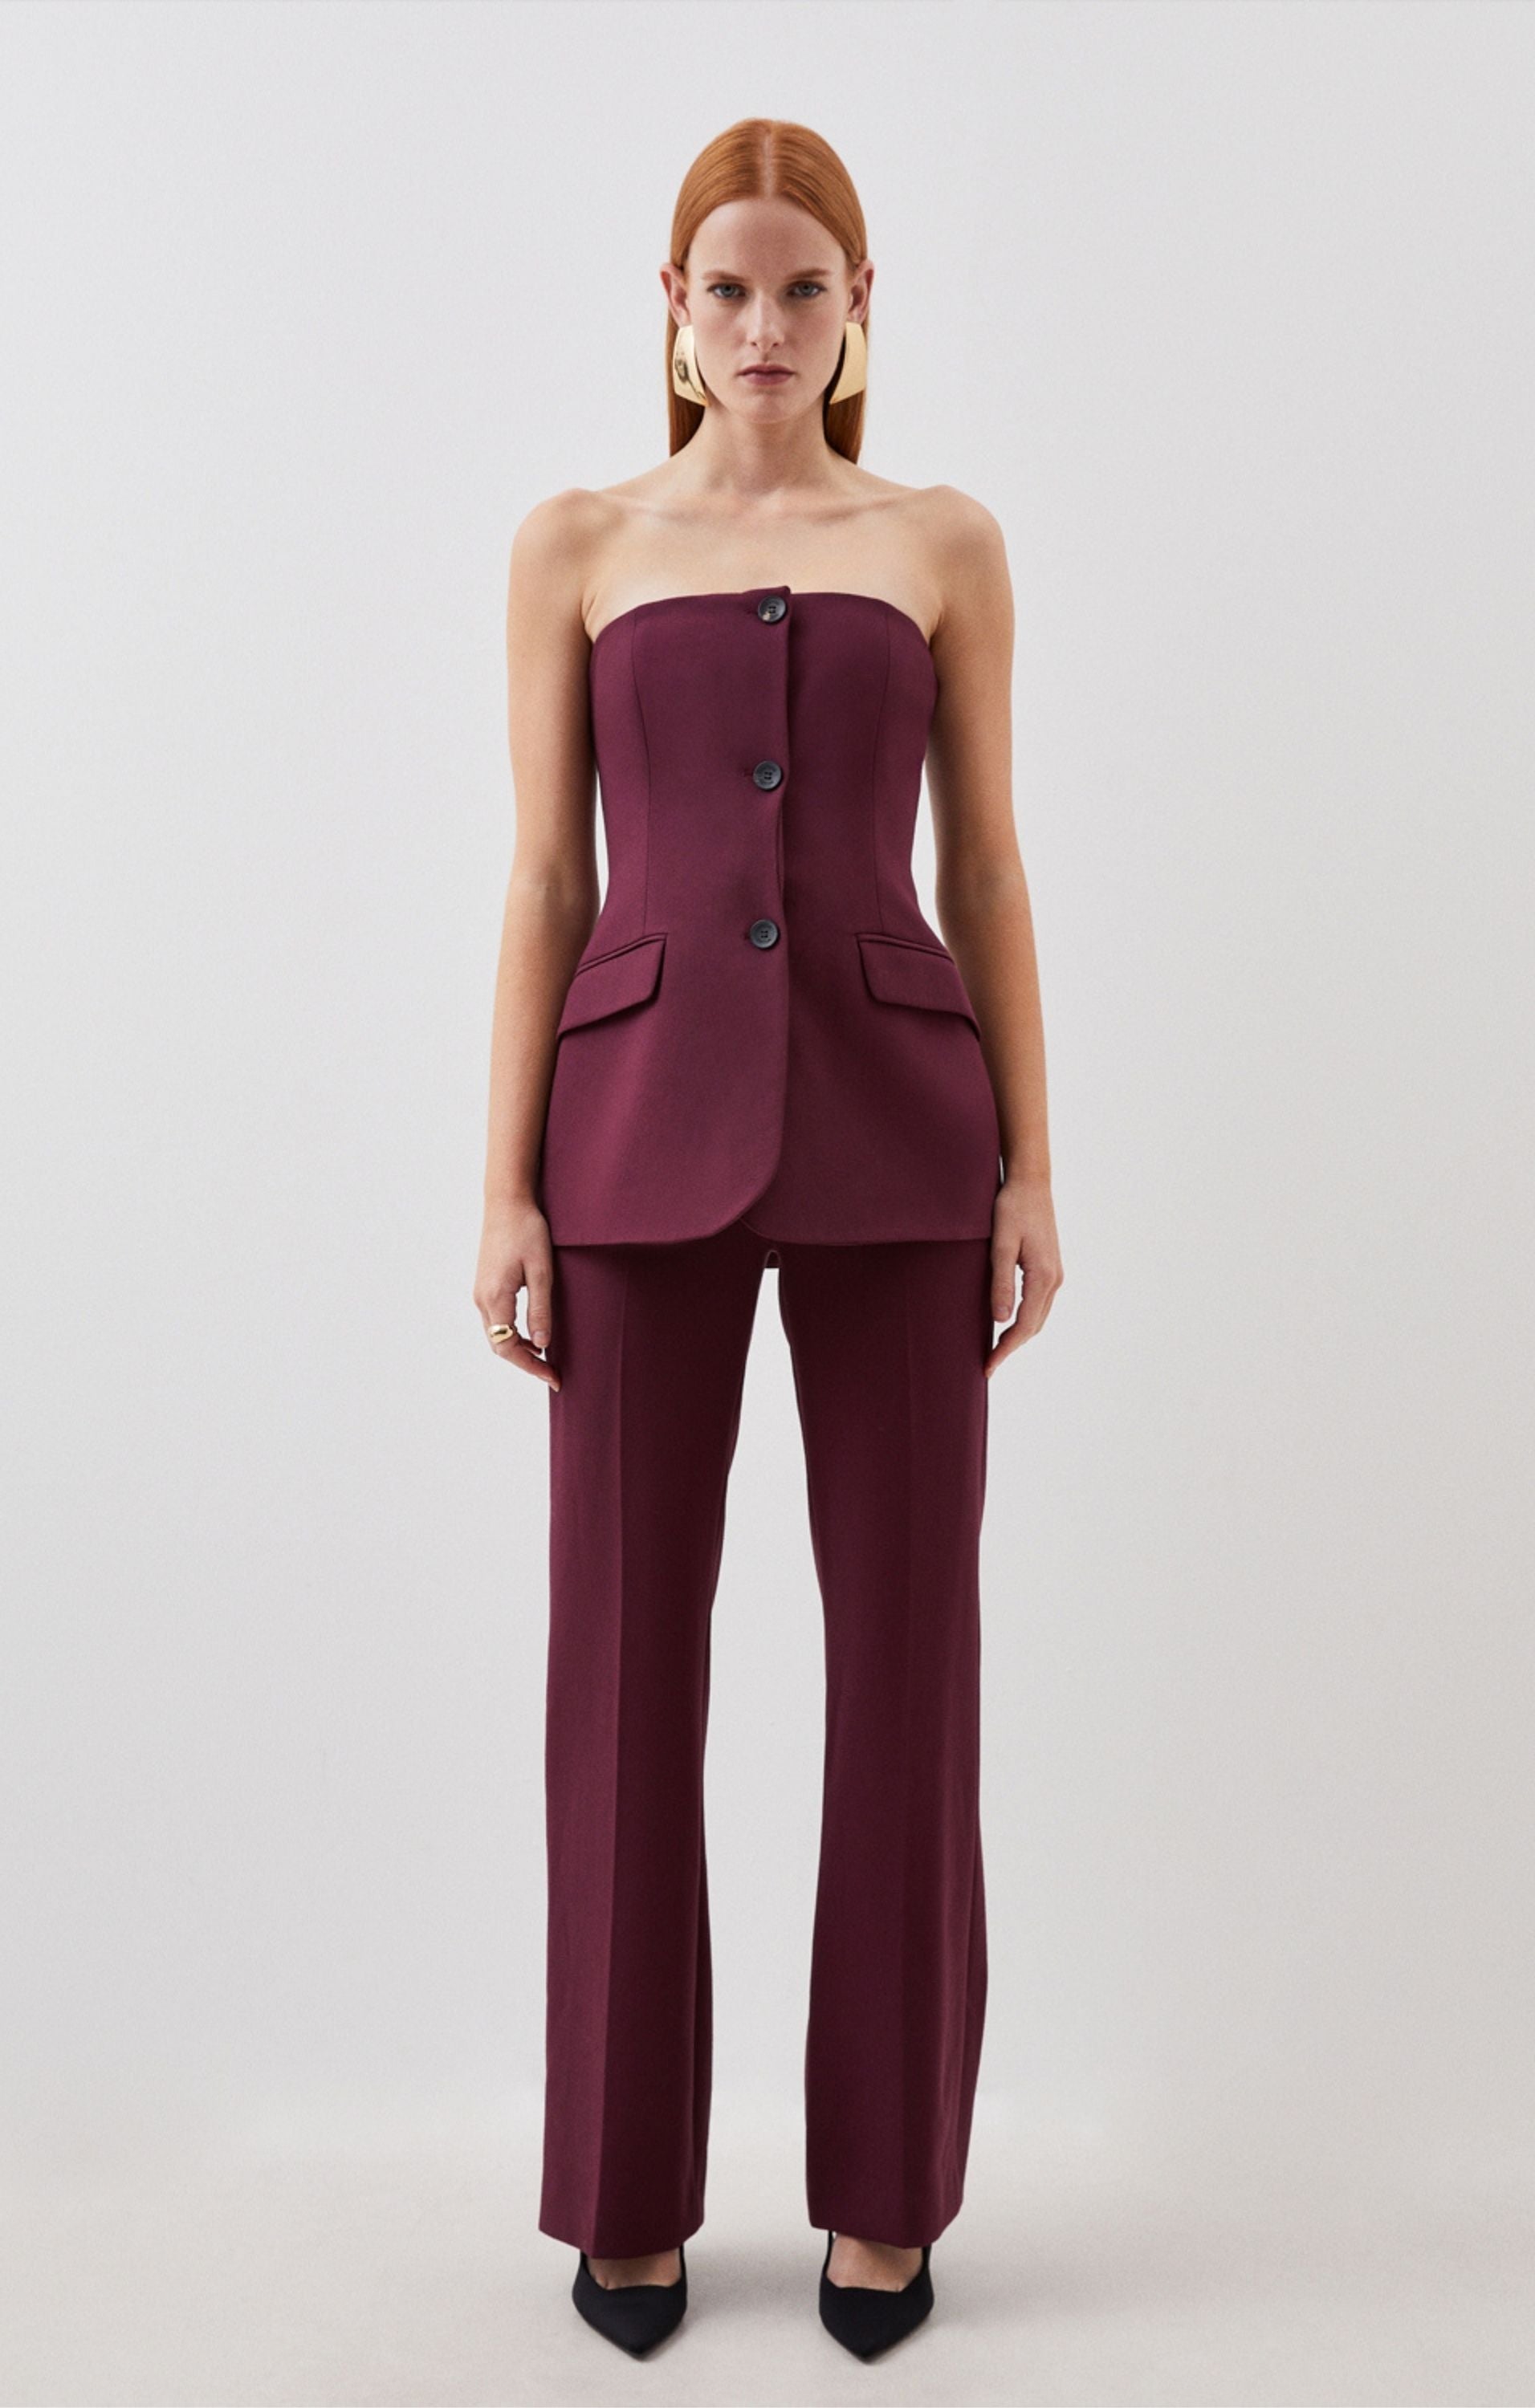 Karen Millen Compact Stretch Tailored Button Bodice Jumpsuit product image